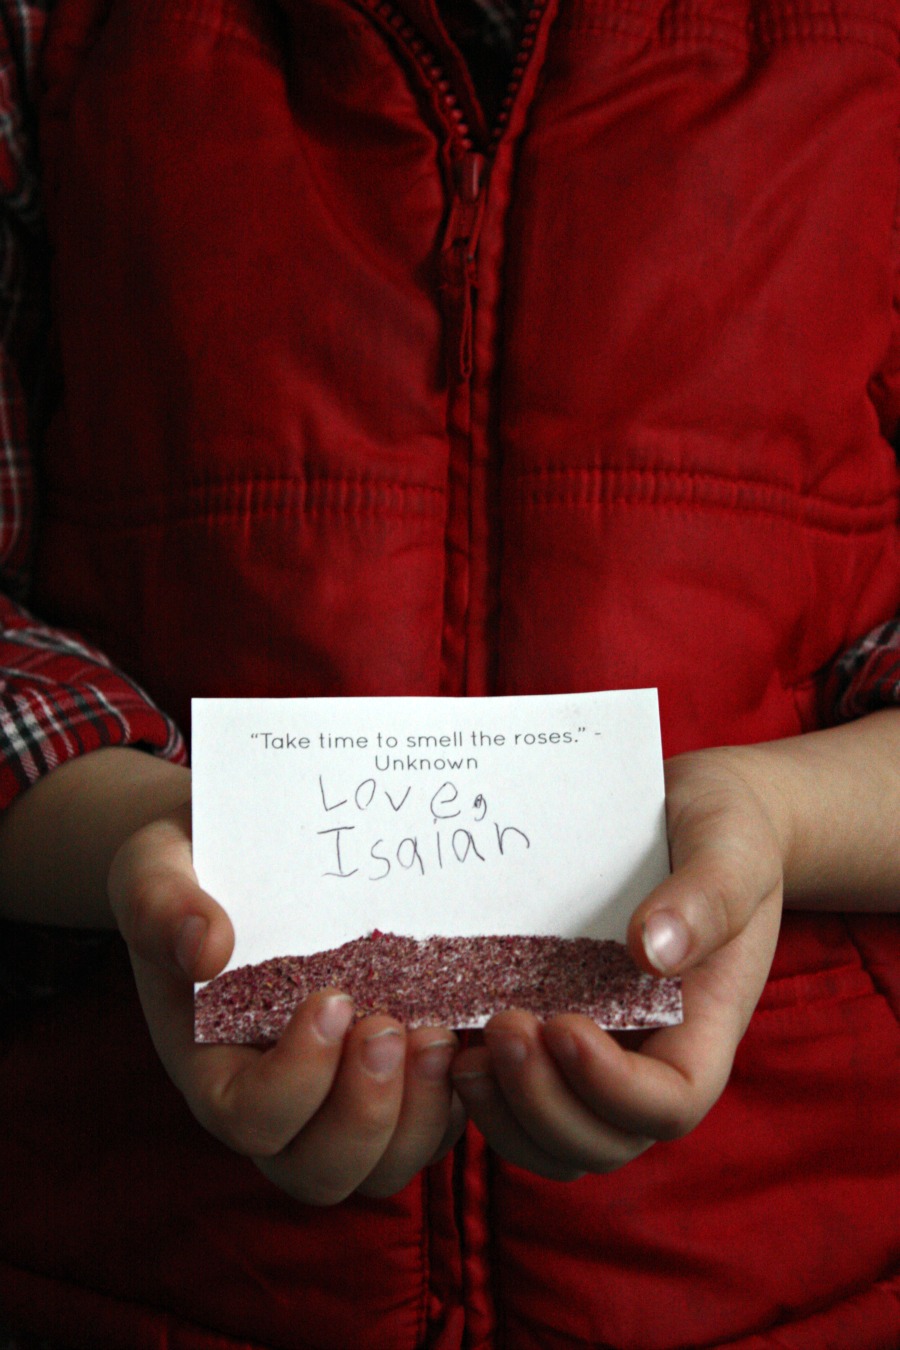 How To Make Scented Rose Dust Valentine's Day Cards For Children | Growing Up Herbal | Make DIY Valentine's Day cards with herbs and essential oils for loved ones this year!